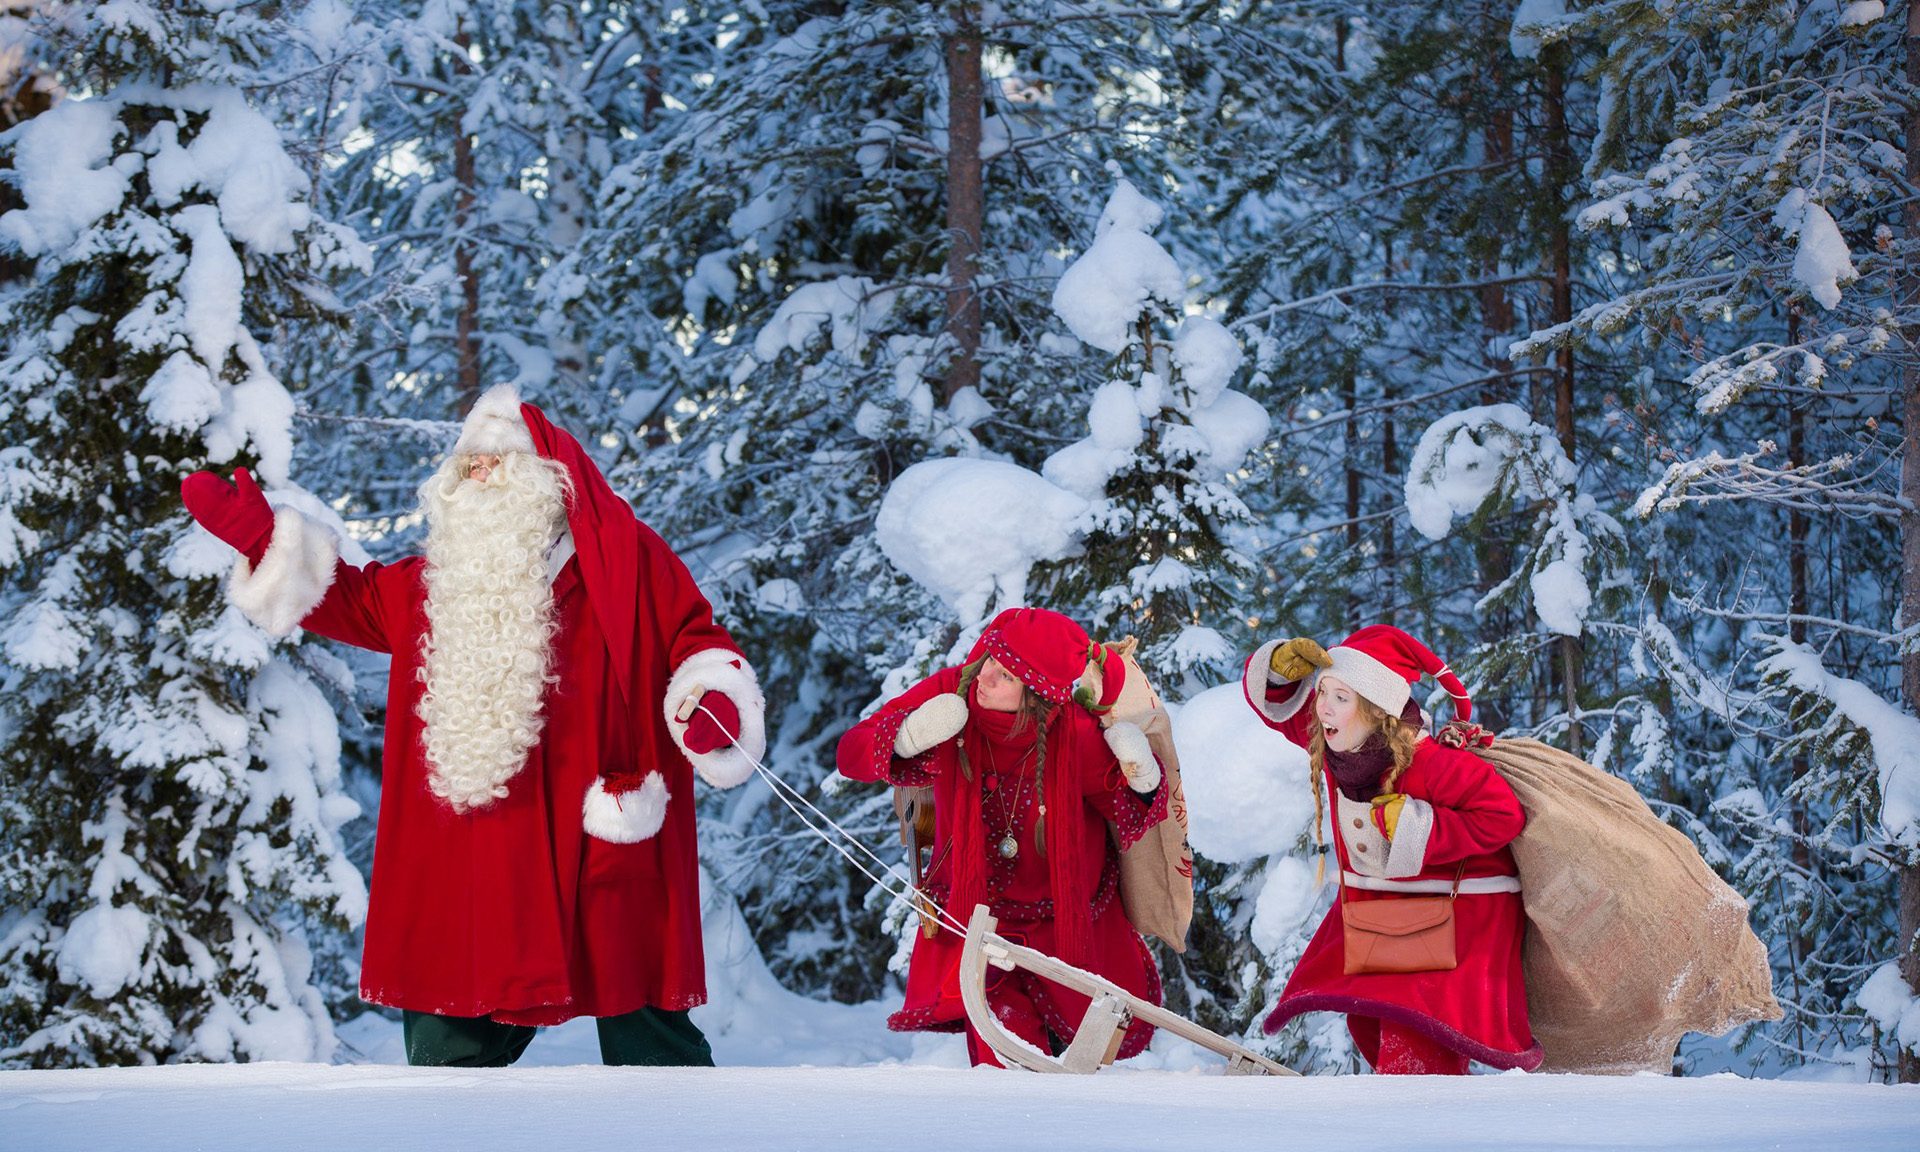 Santa Claus and Elves carrying presents in Santa Claus Secret Forest Joulukka.